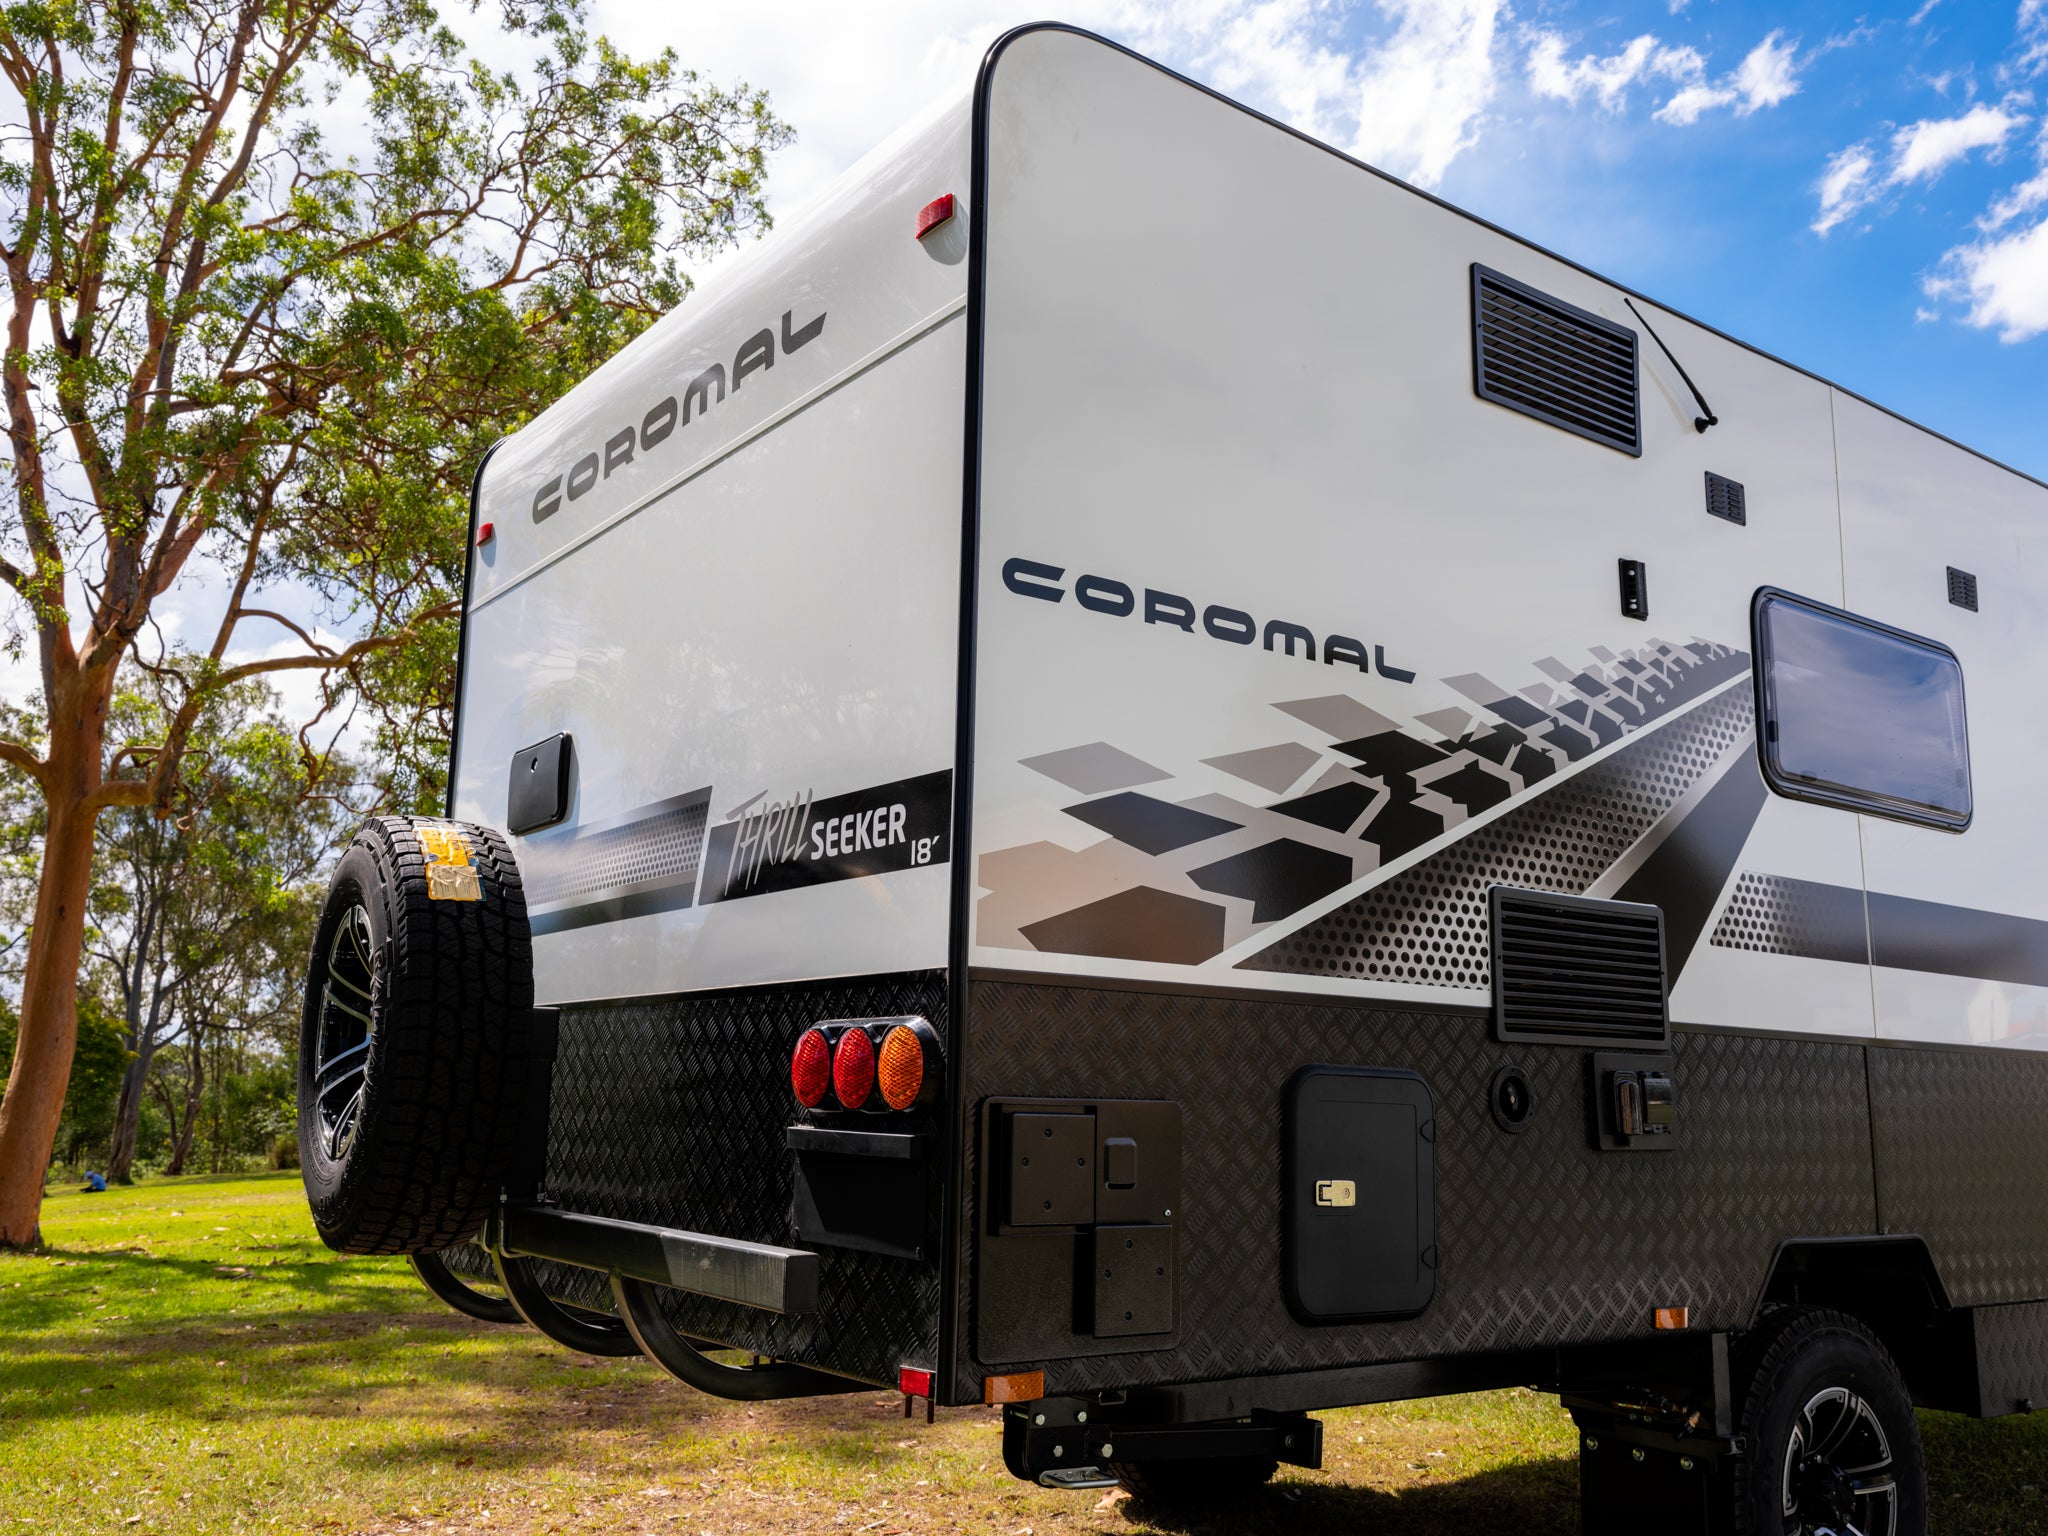 Coromal Thrill Seeker 18 Couples caravan rear view with spare wheel